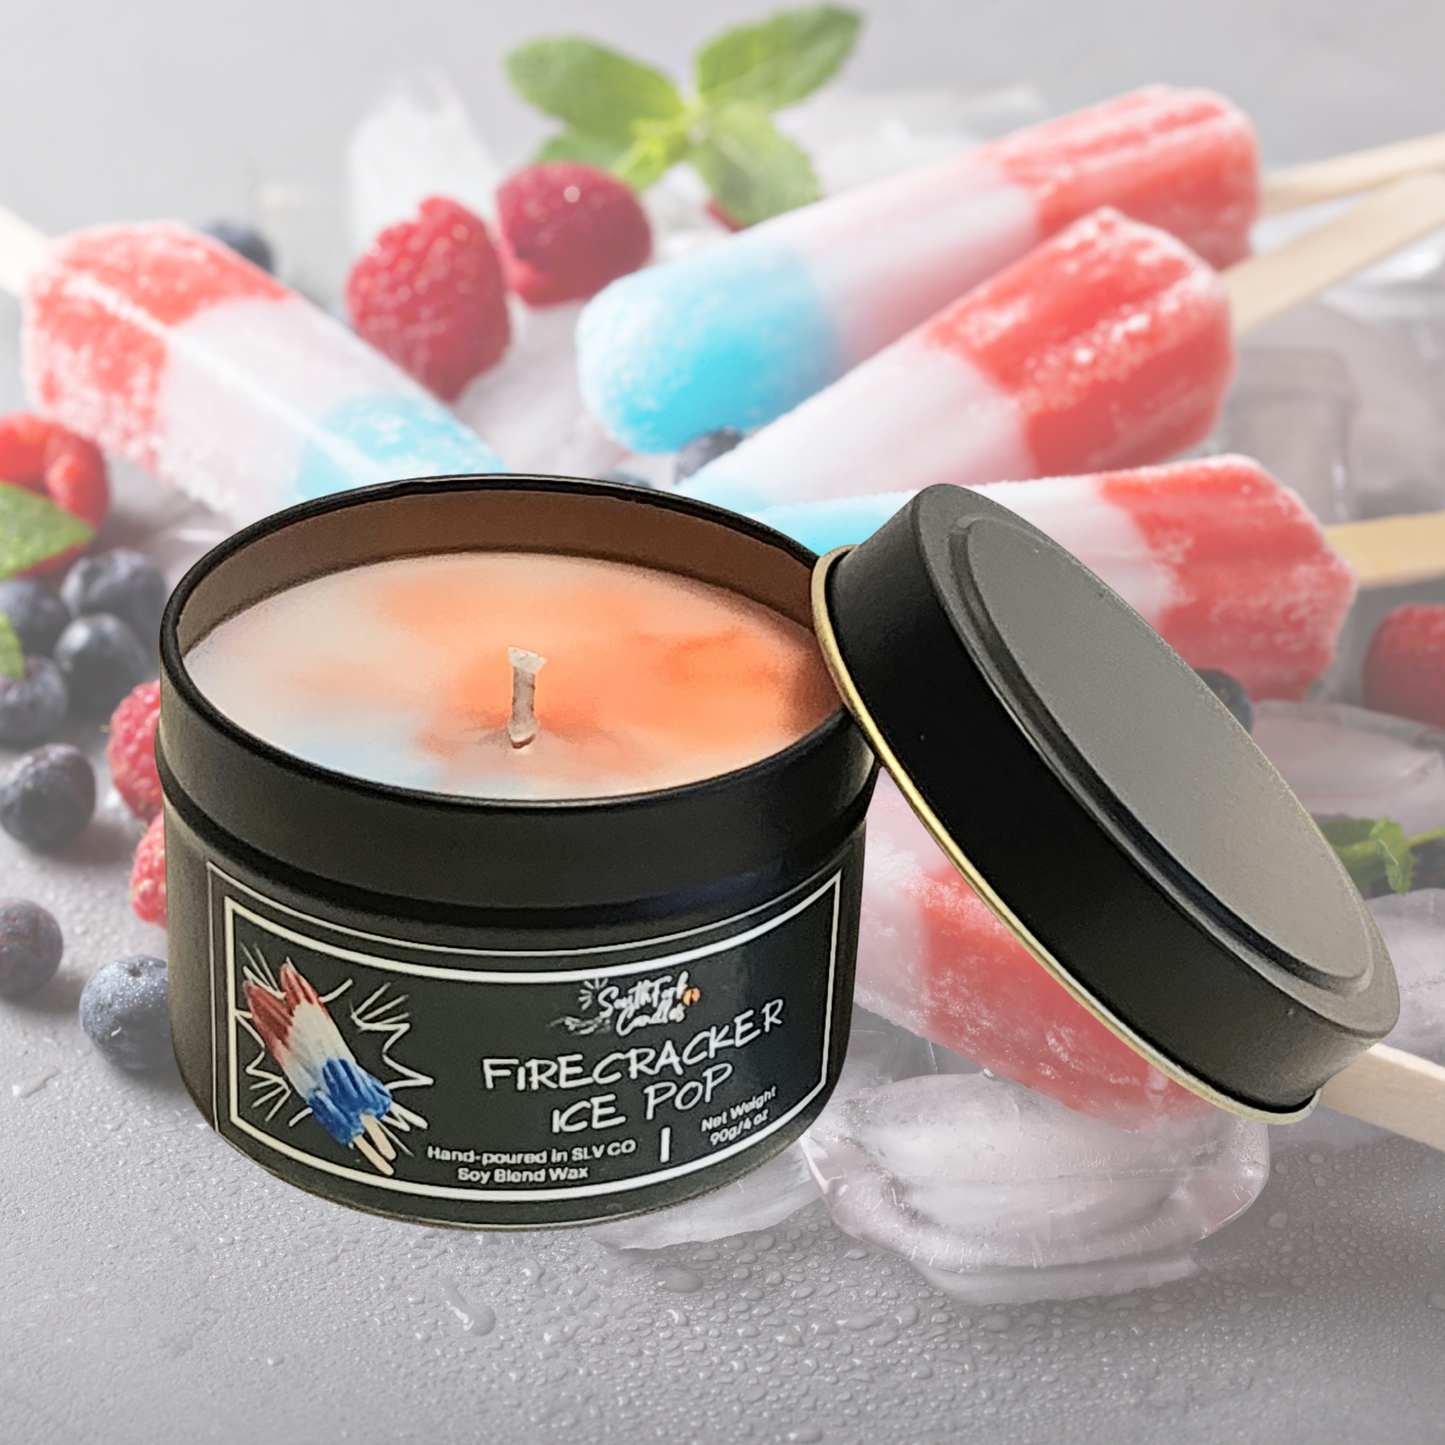 Firecracker Ice Pop Scented Candle